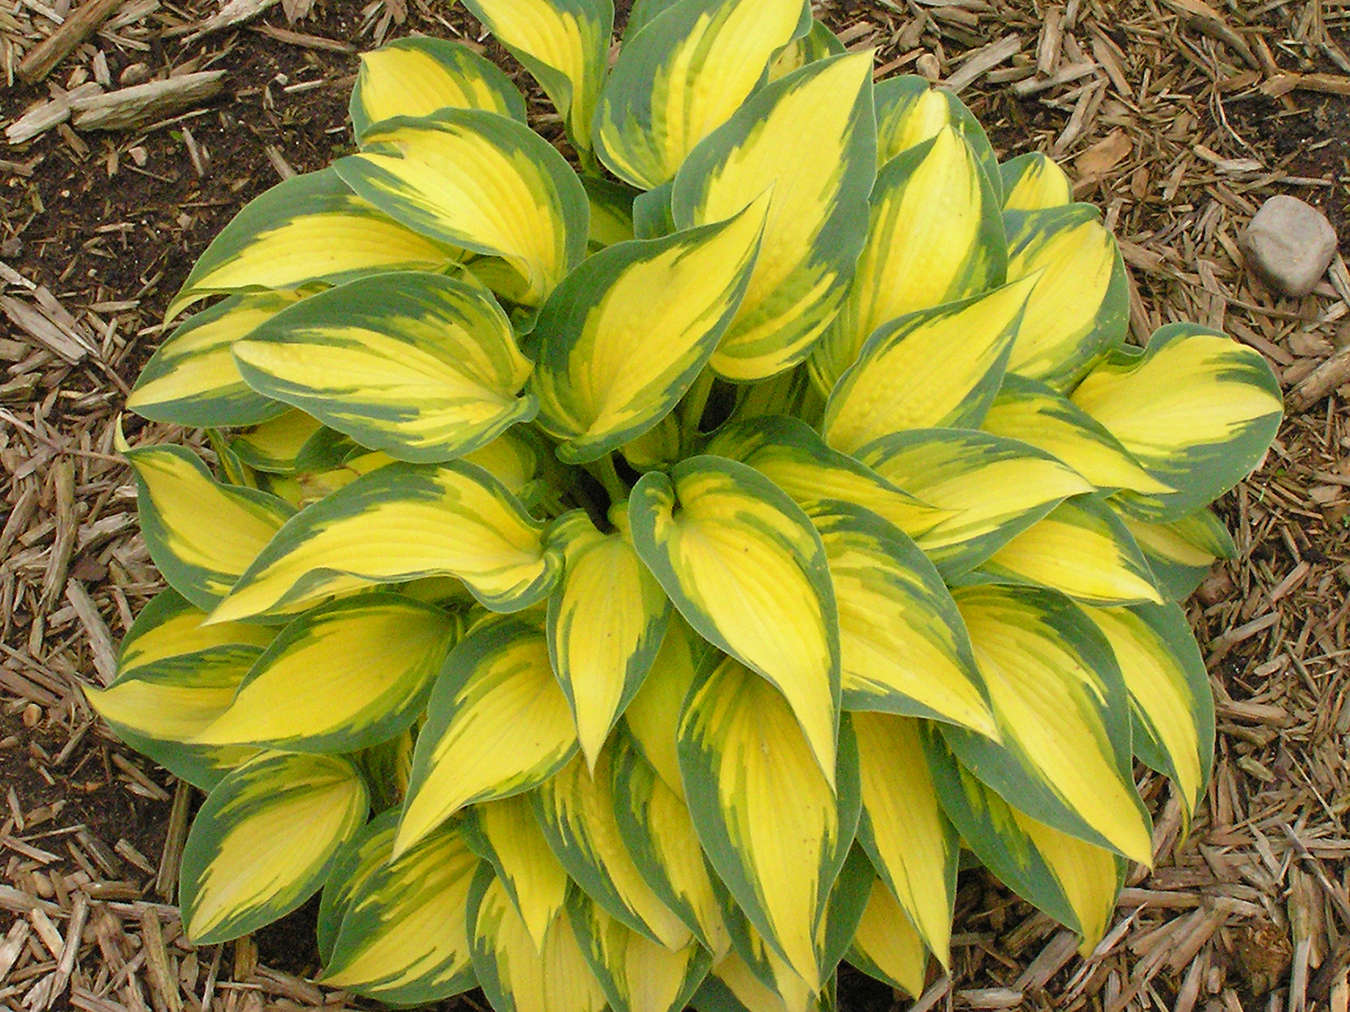 Hosta 'Remember Me' - A Plant for a Cure!